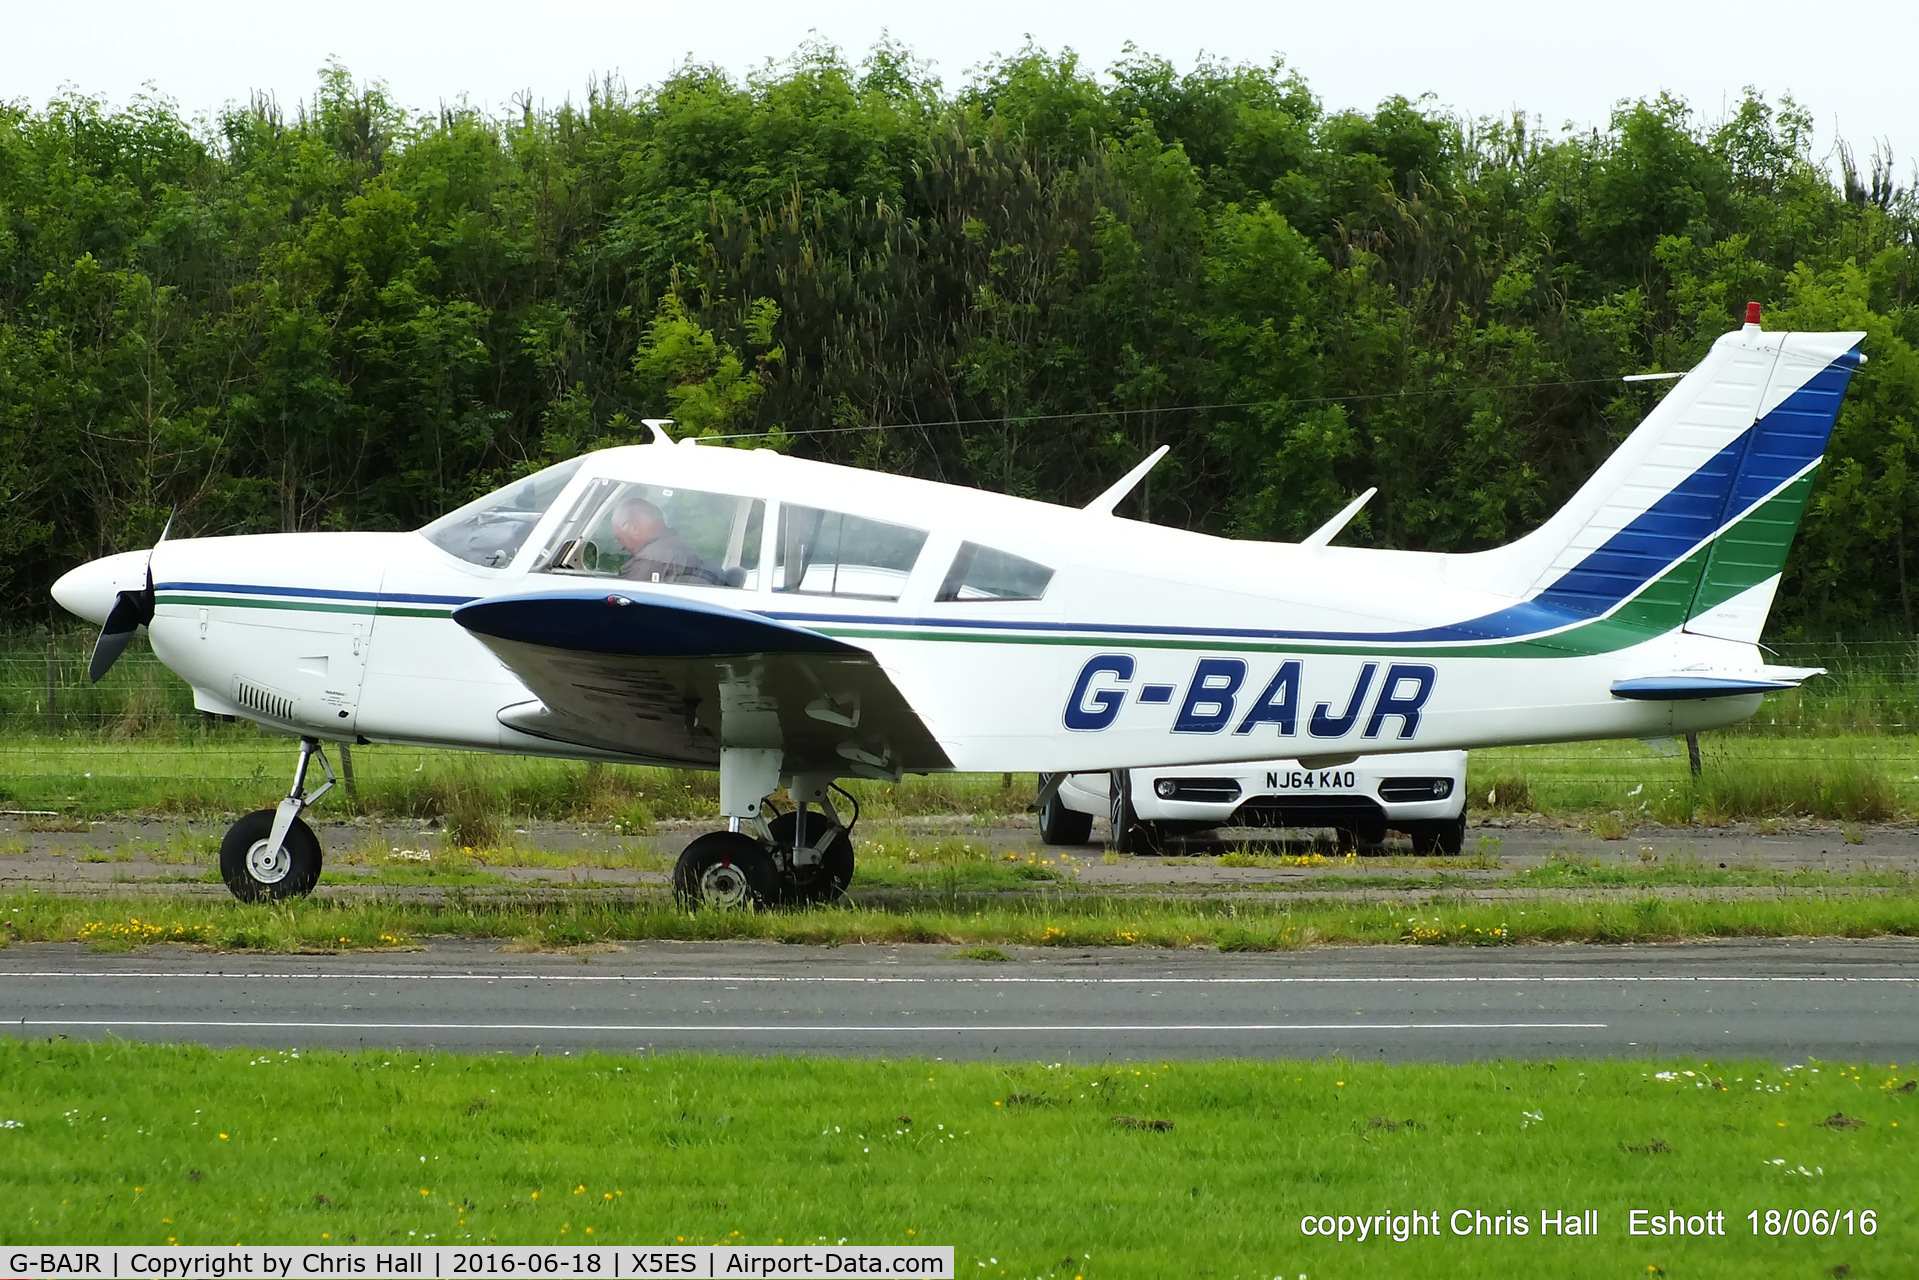 G-BAJR, 1972 Piper PA-28-180 Cherokee C/N 28-7305008, at the Great North Fly in. Eshott